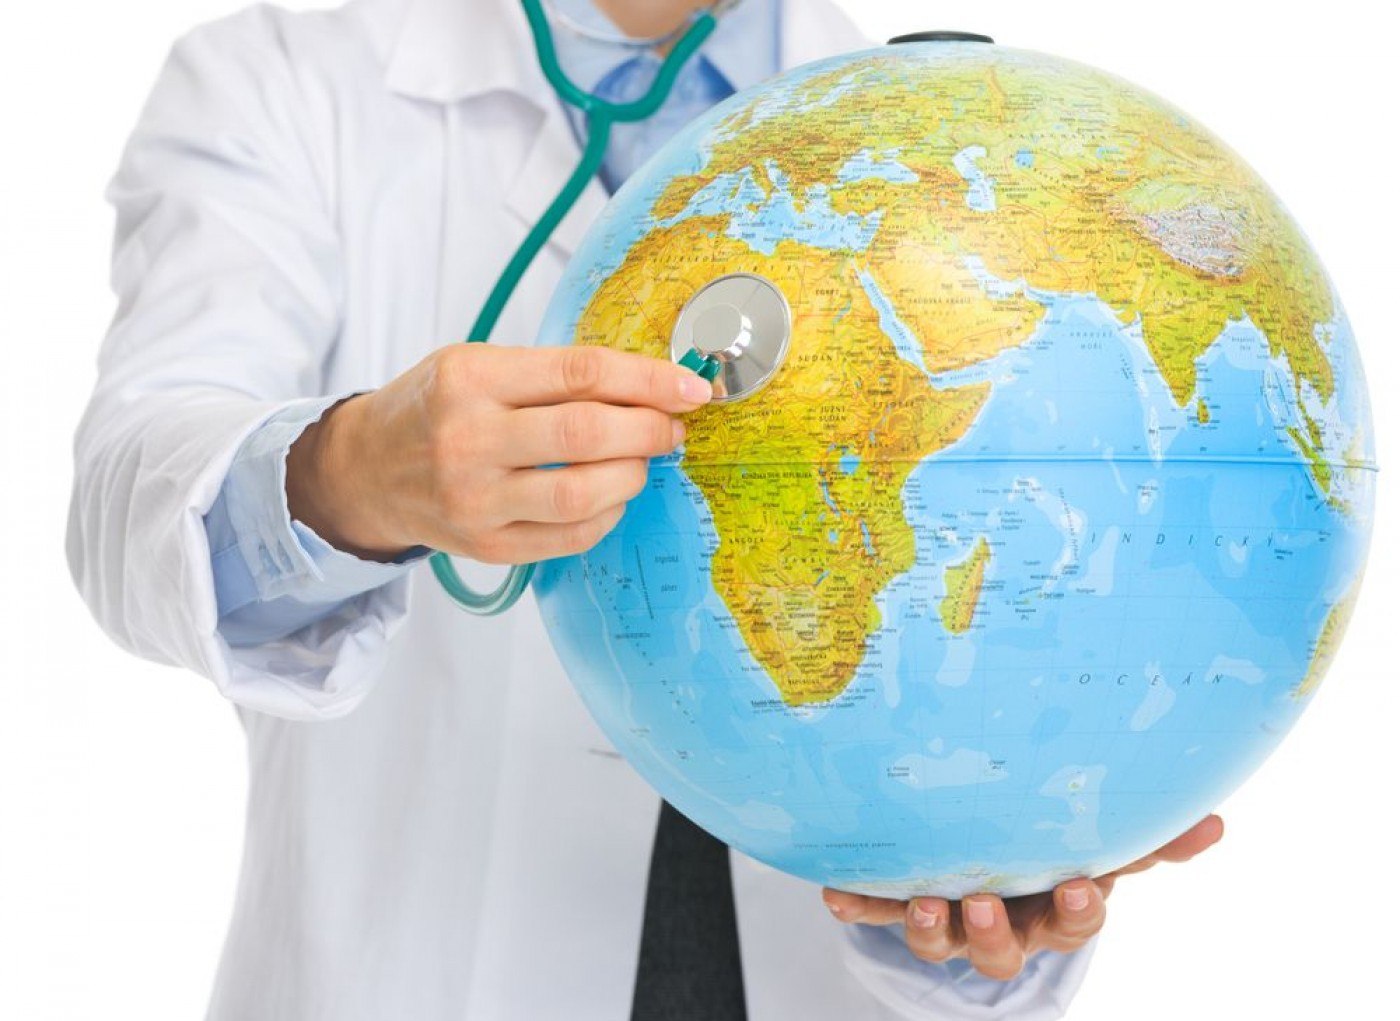 Moldova is the new president of the Global Medical Tourism Council